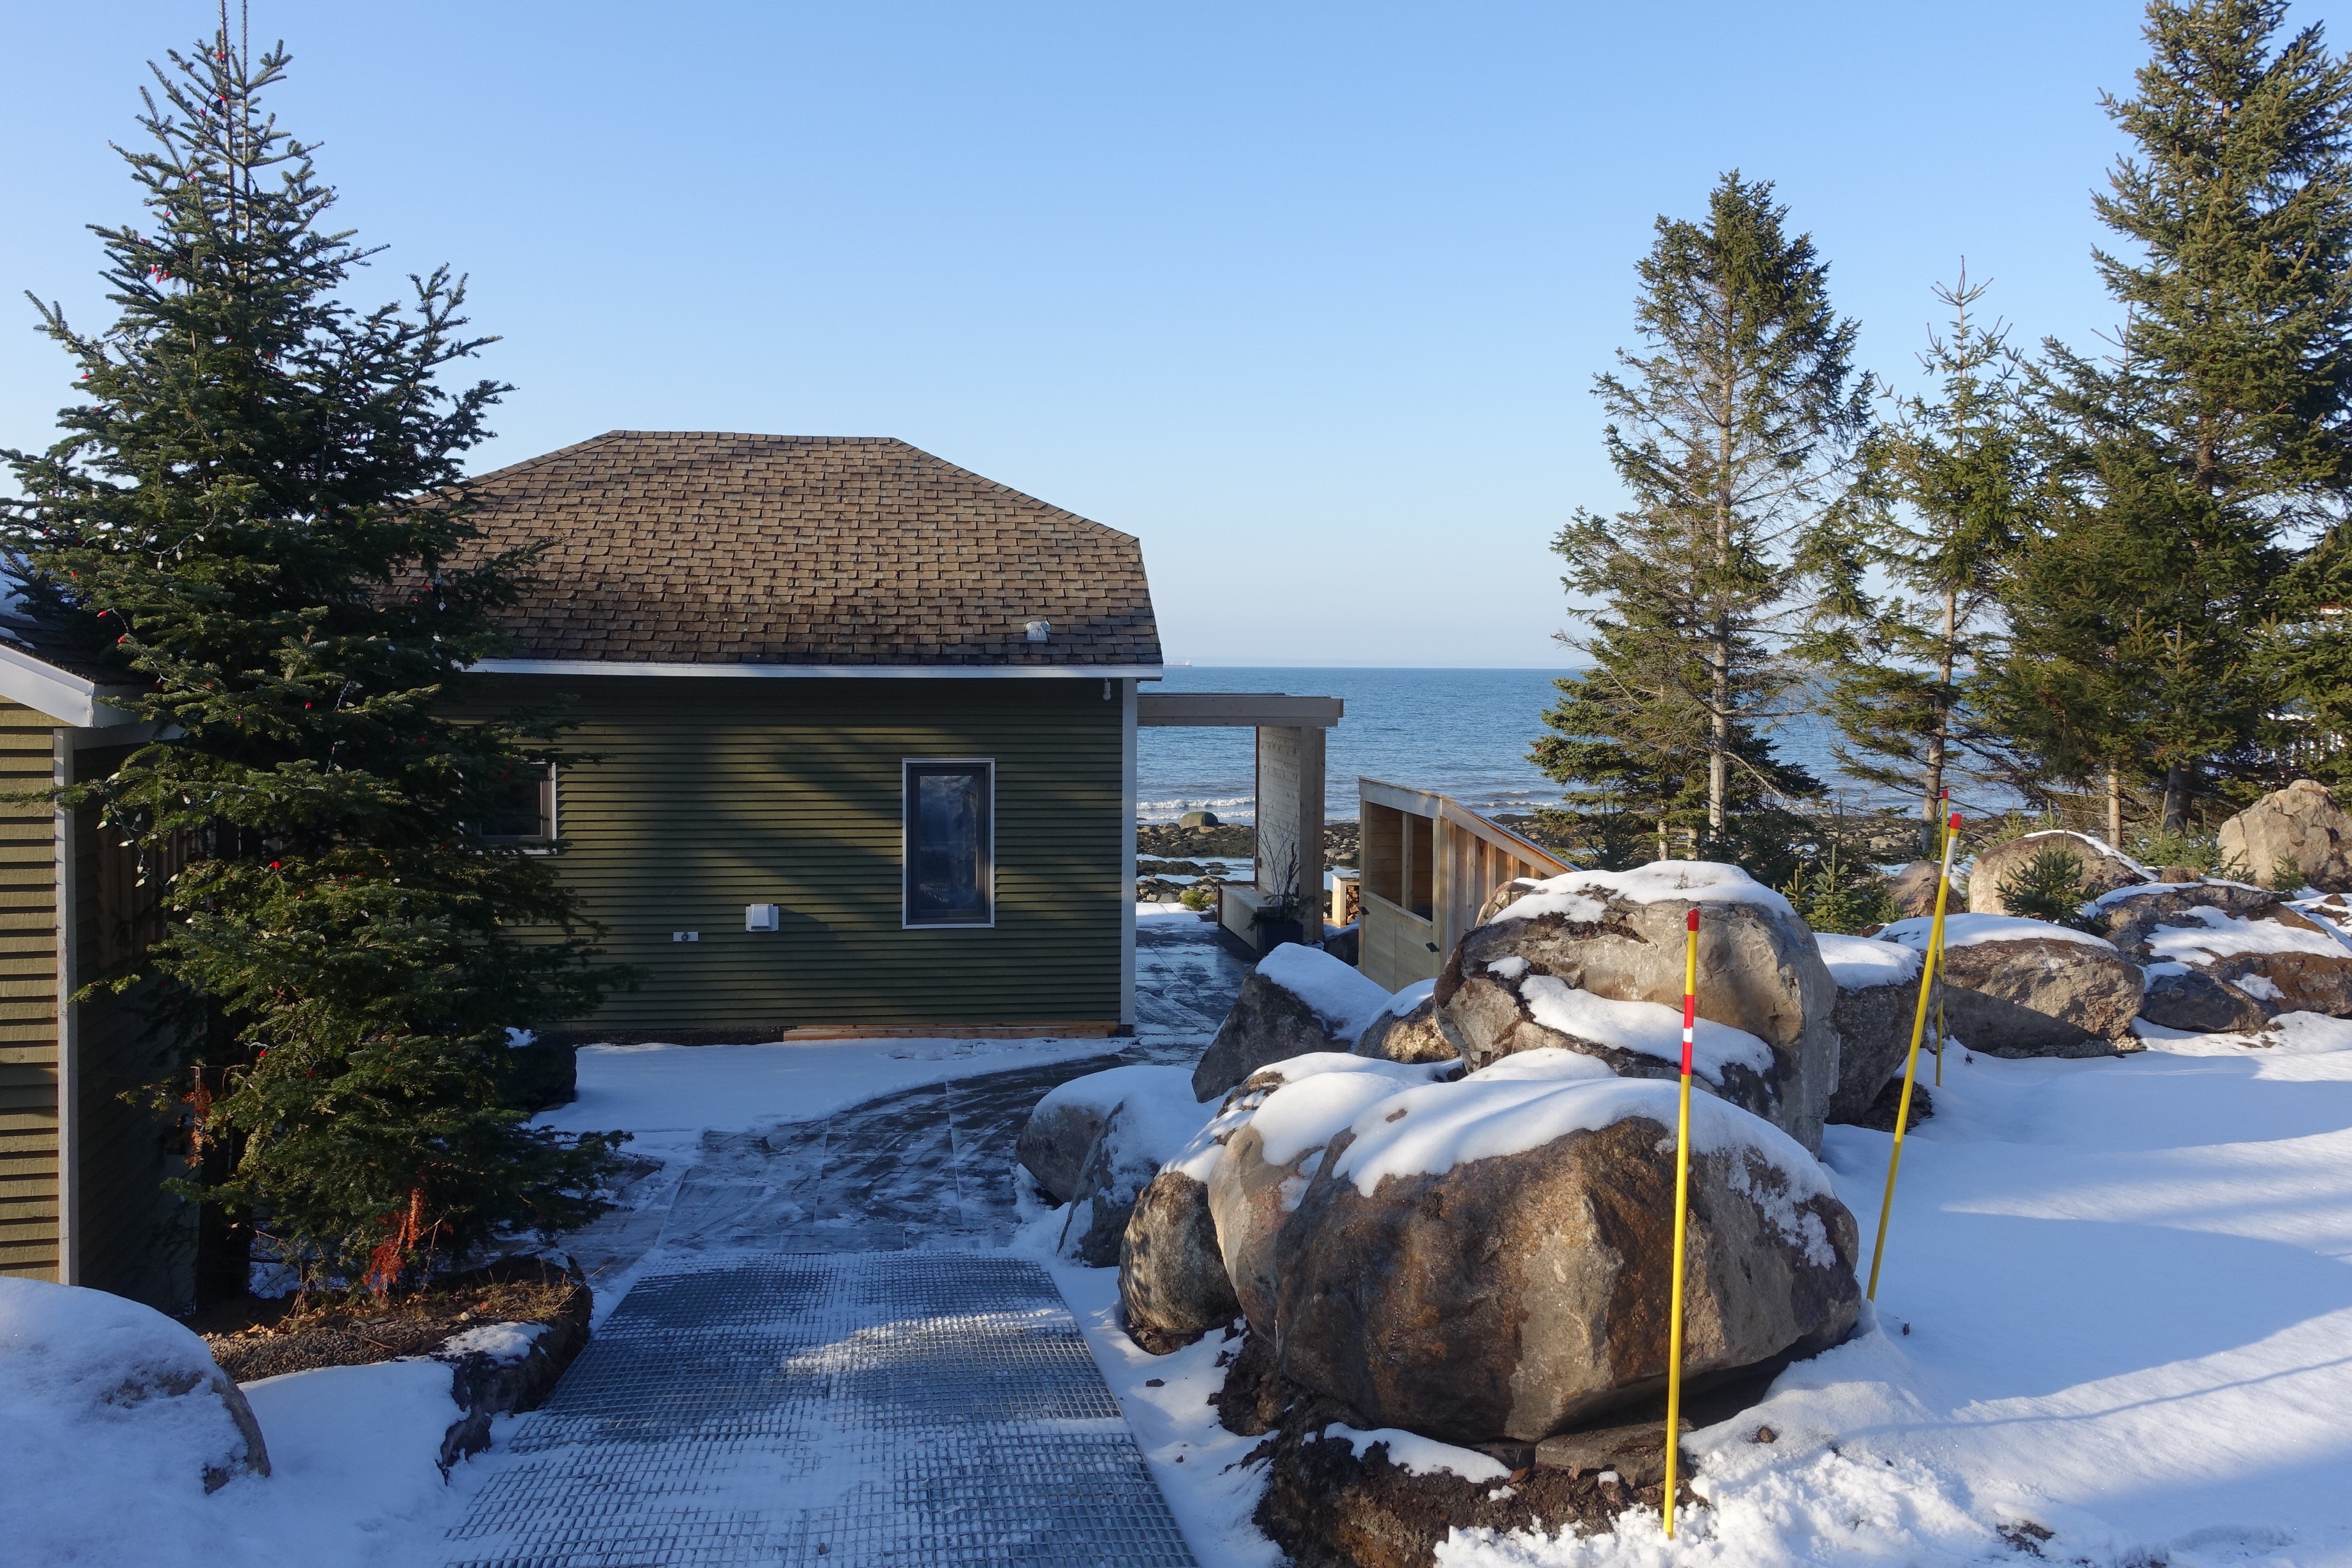 Waterfront cottages for rent for 4 people in Quebec #13